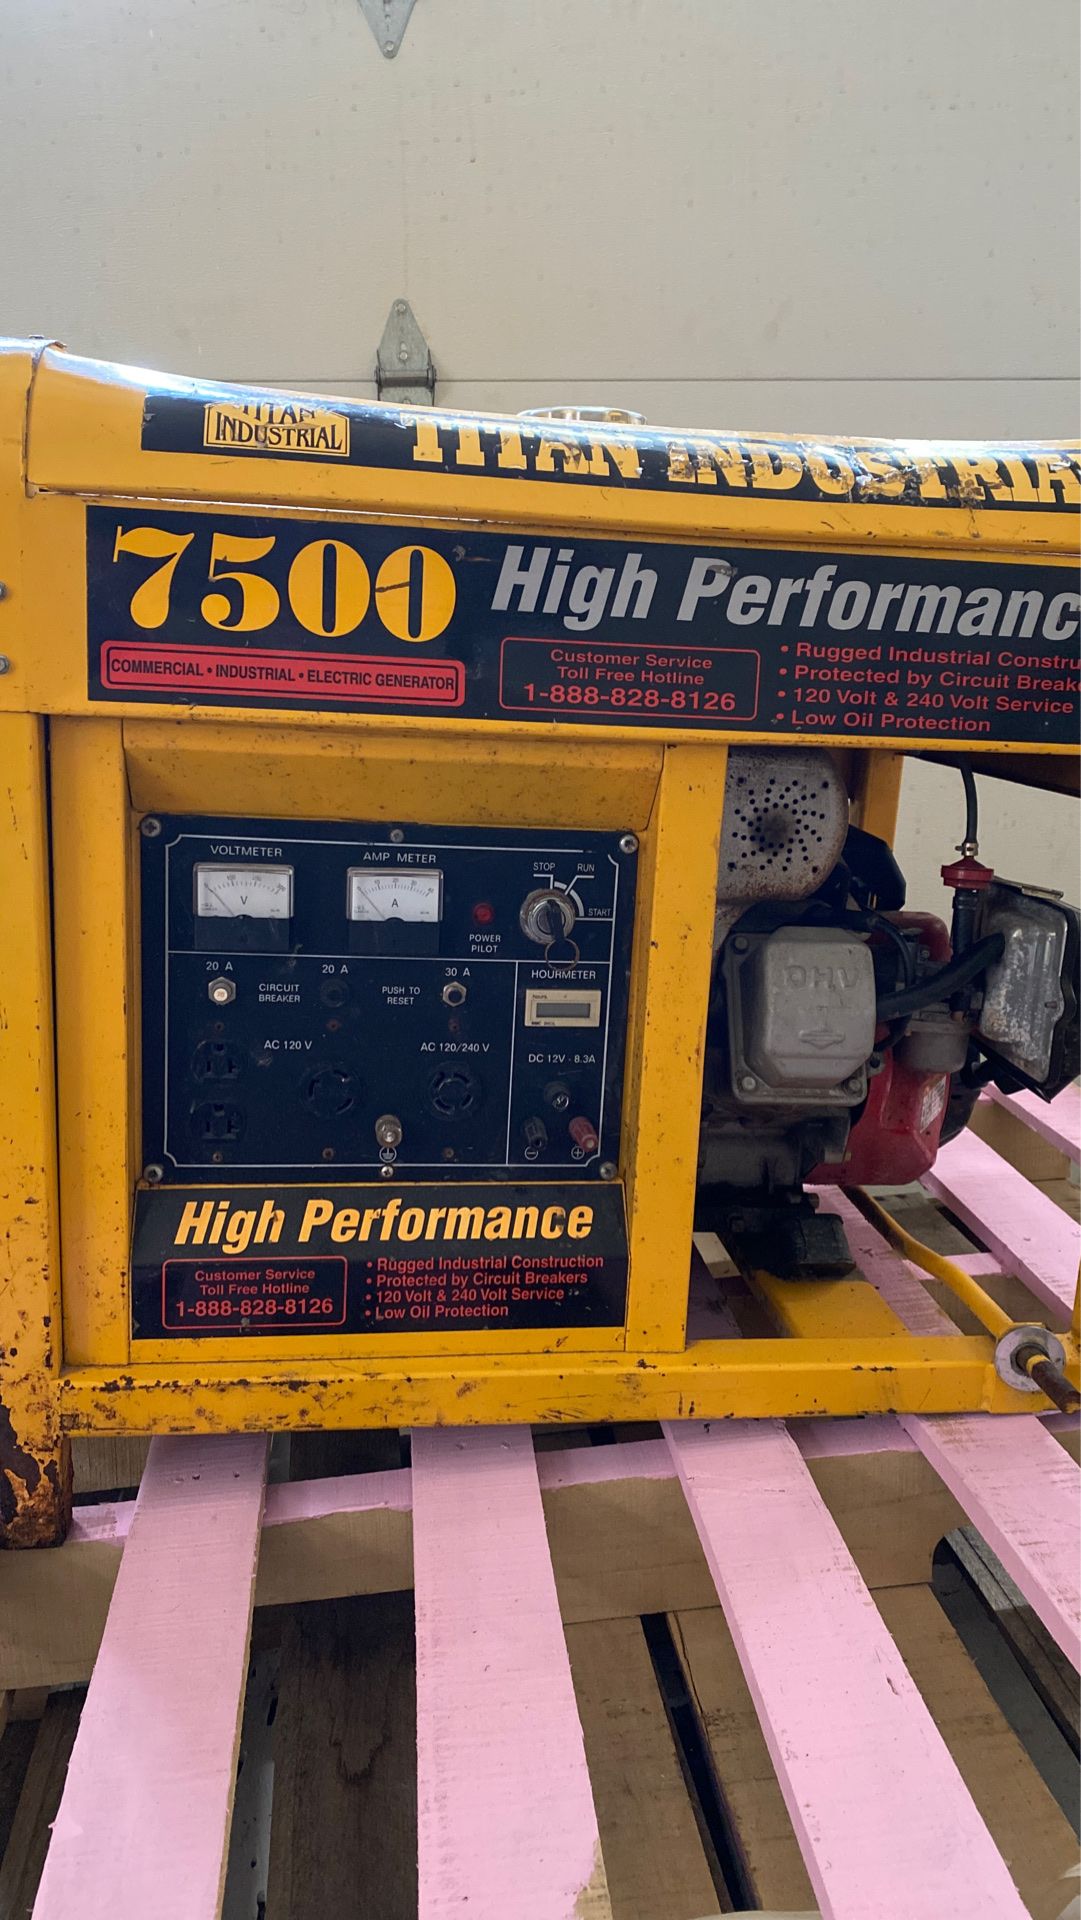 Titan industrial 7500 high performance commercial gas powered generator